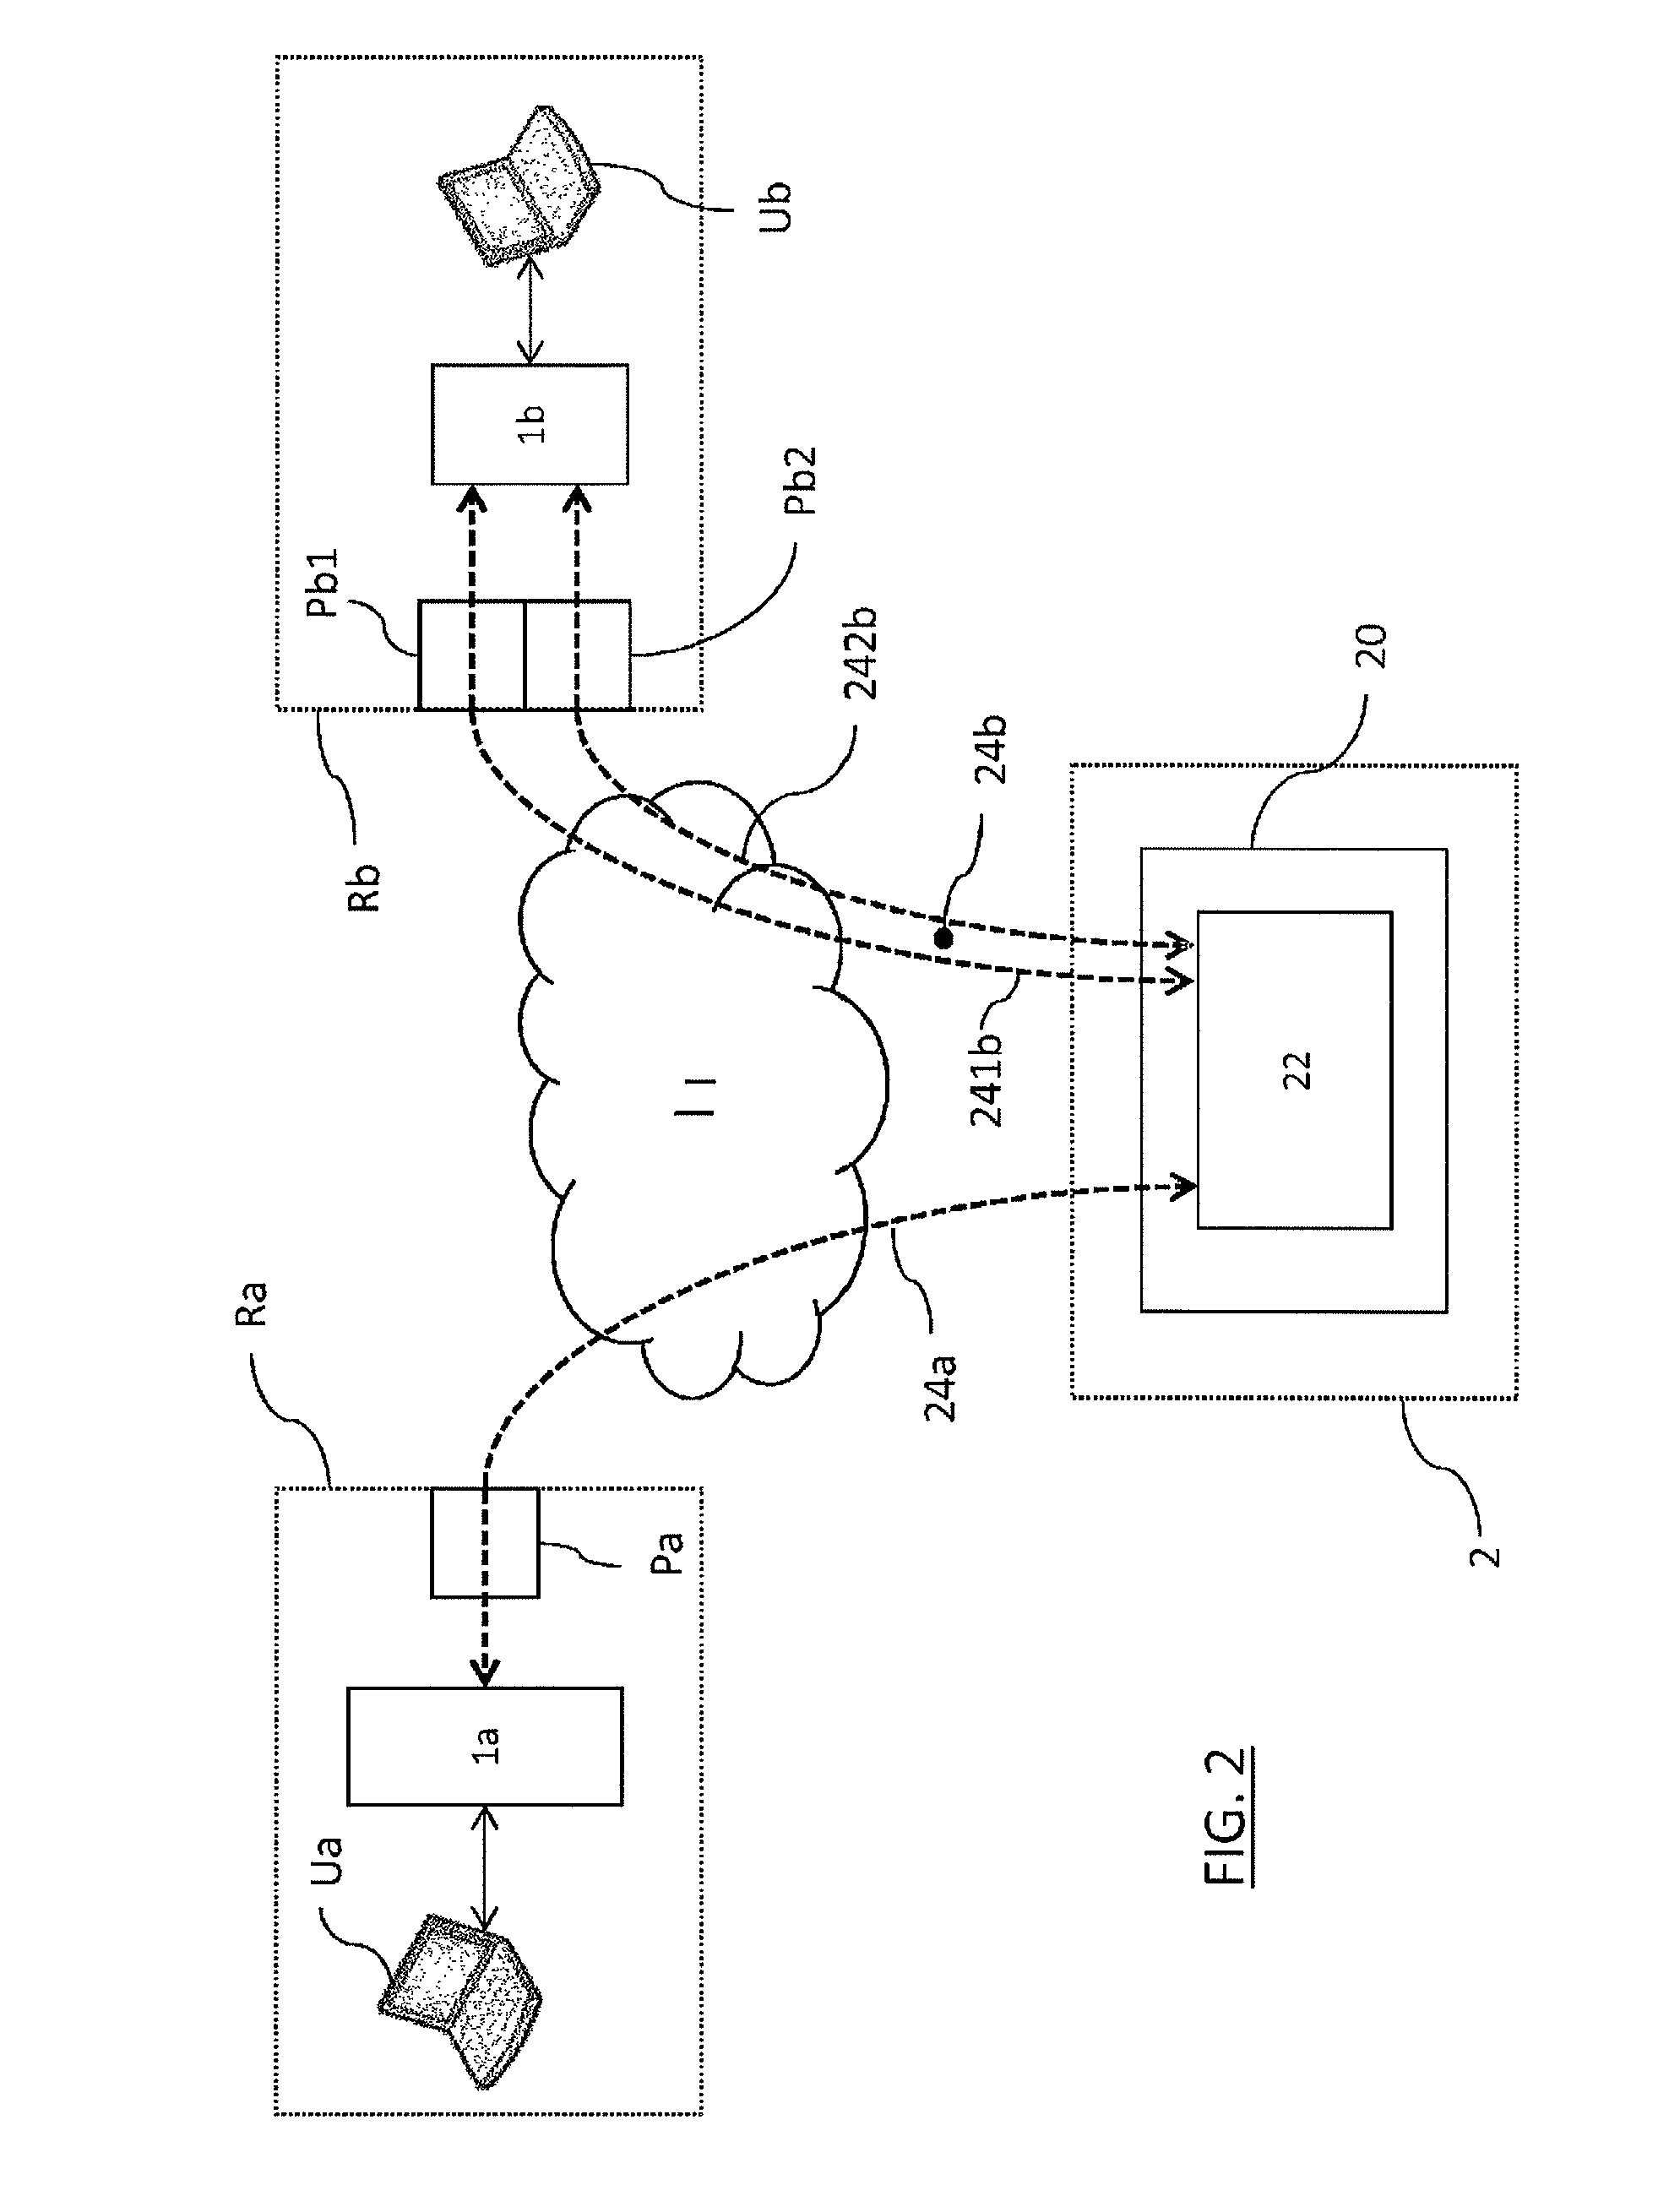 Method and system for establishing virtual private networks between local area networks